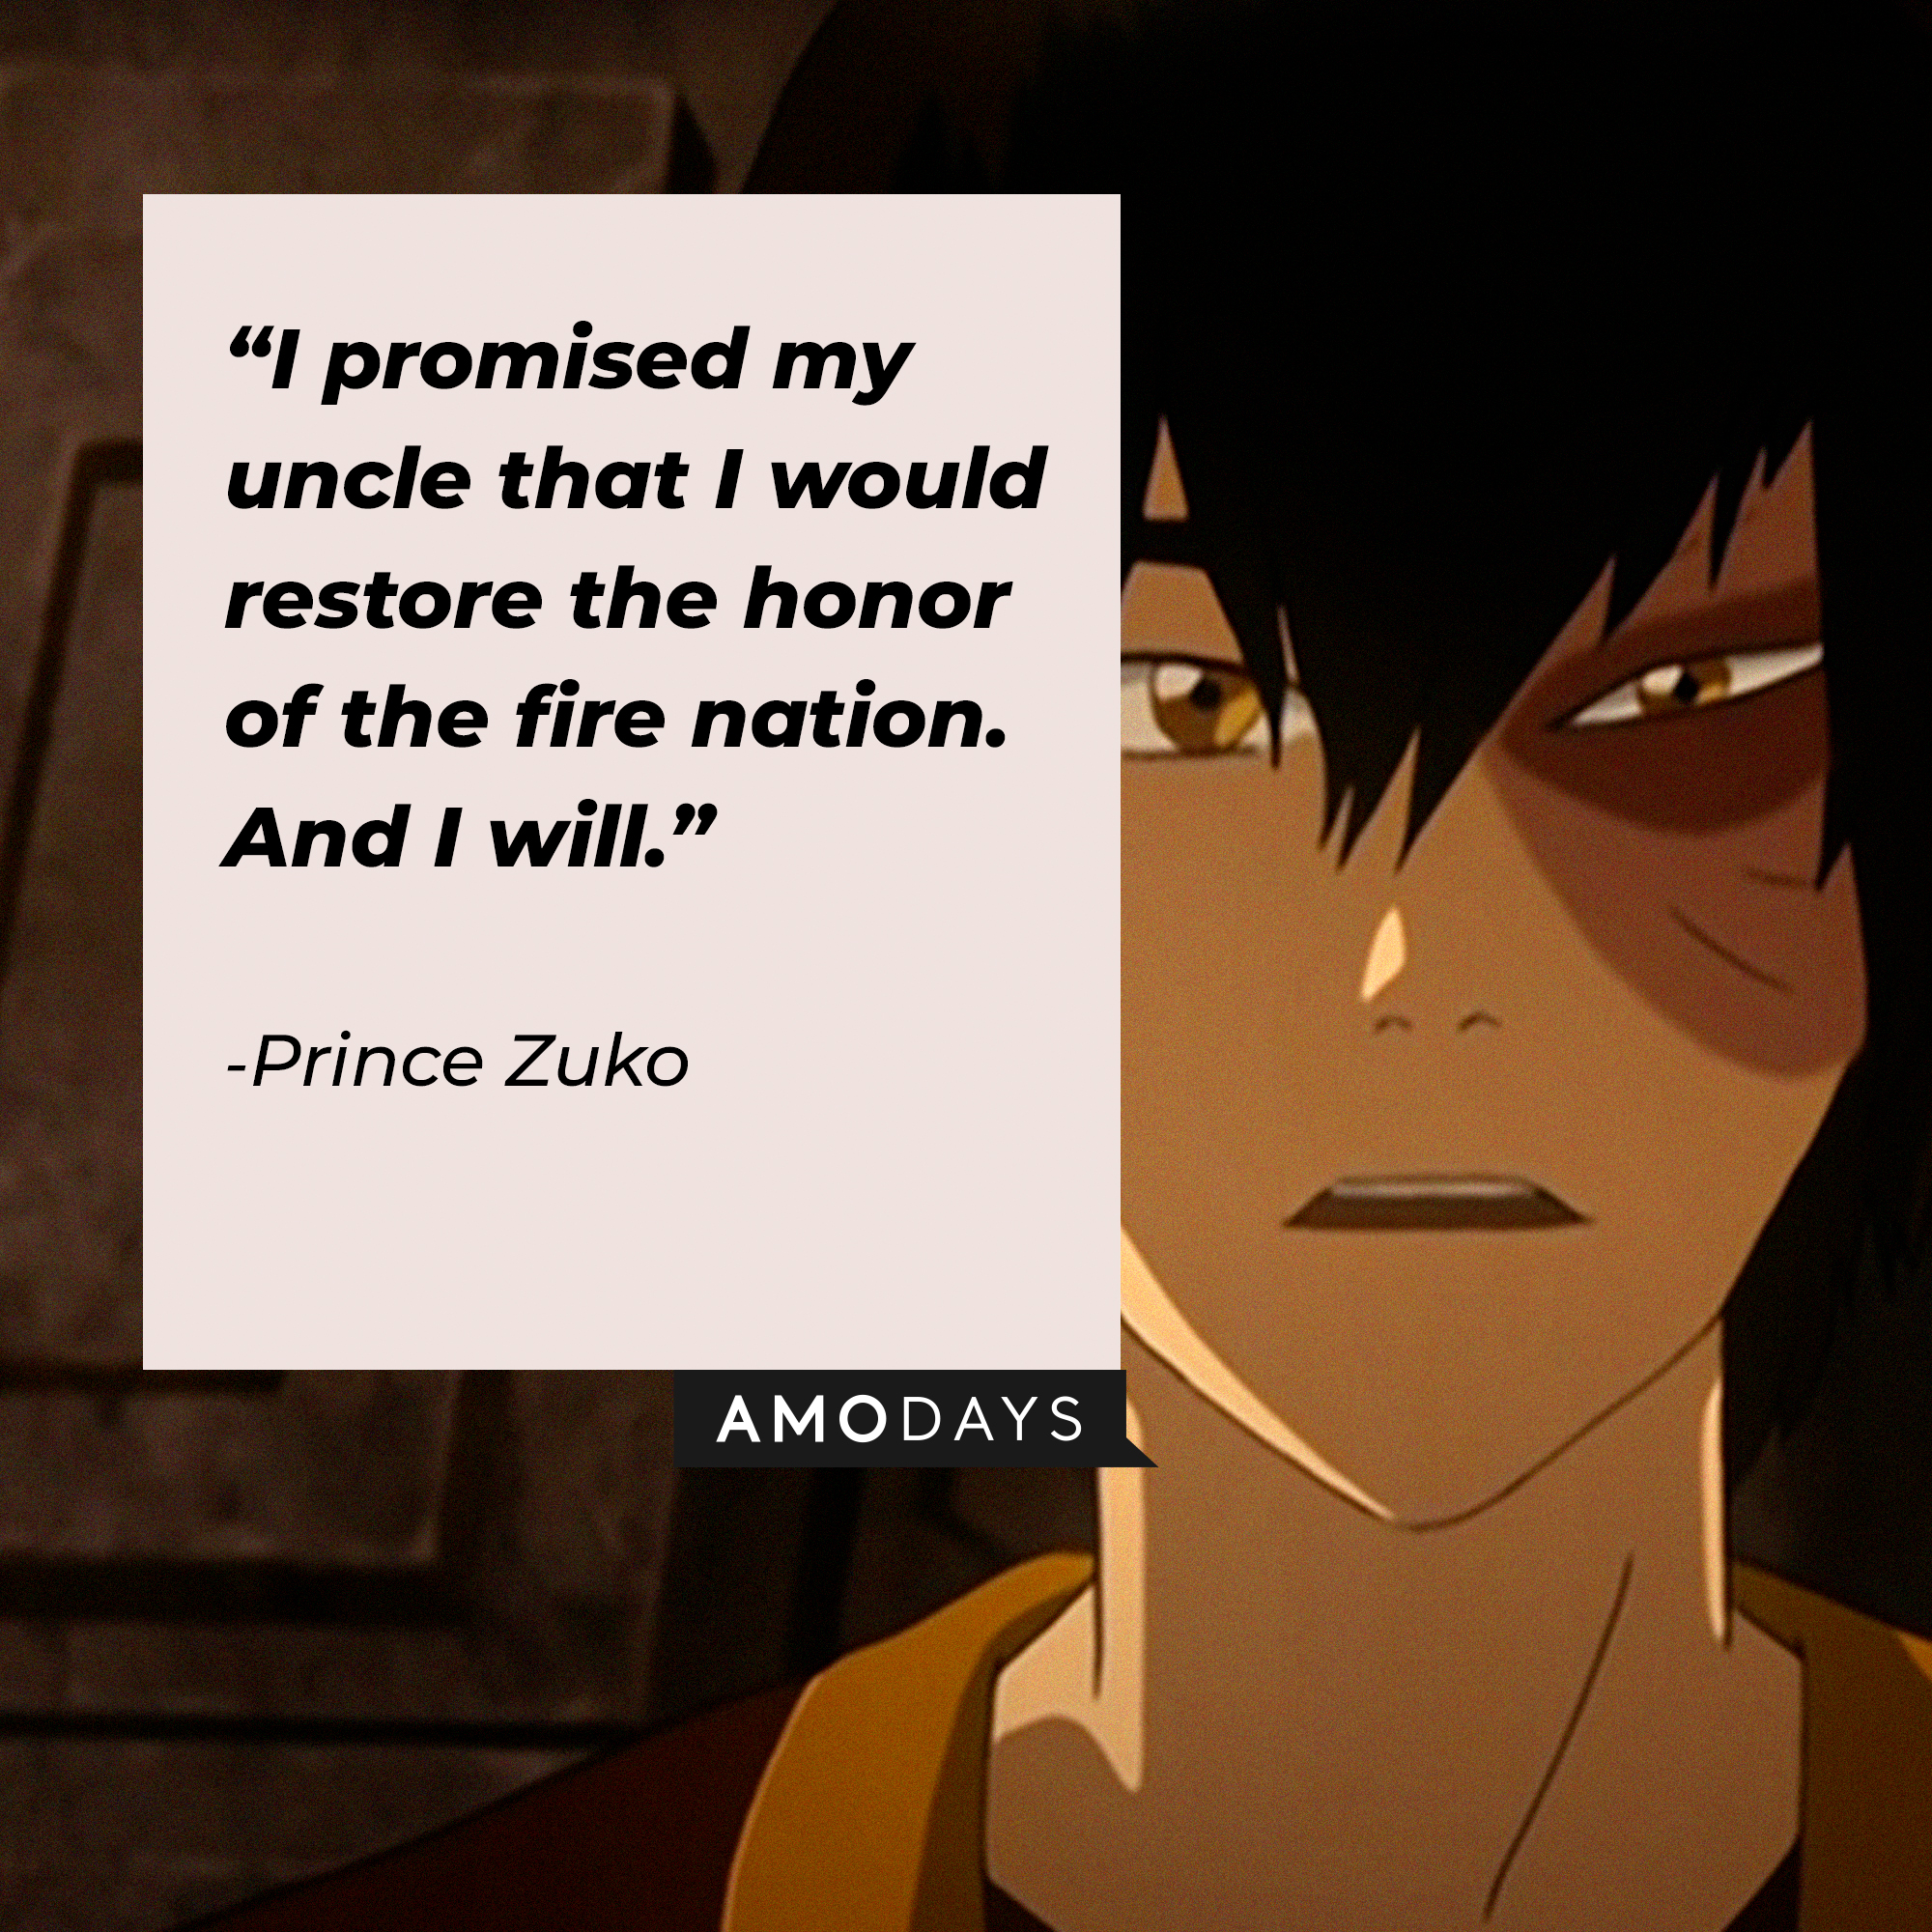 Zuko's quote: "I promised my uncle that I would restore the honor of the fire nation. And I will." | Source: youtube.com/TeamAvatar